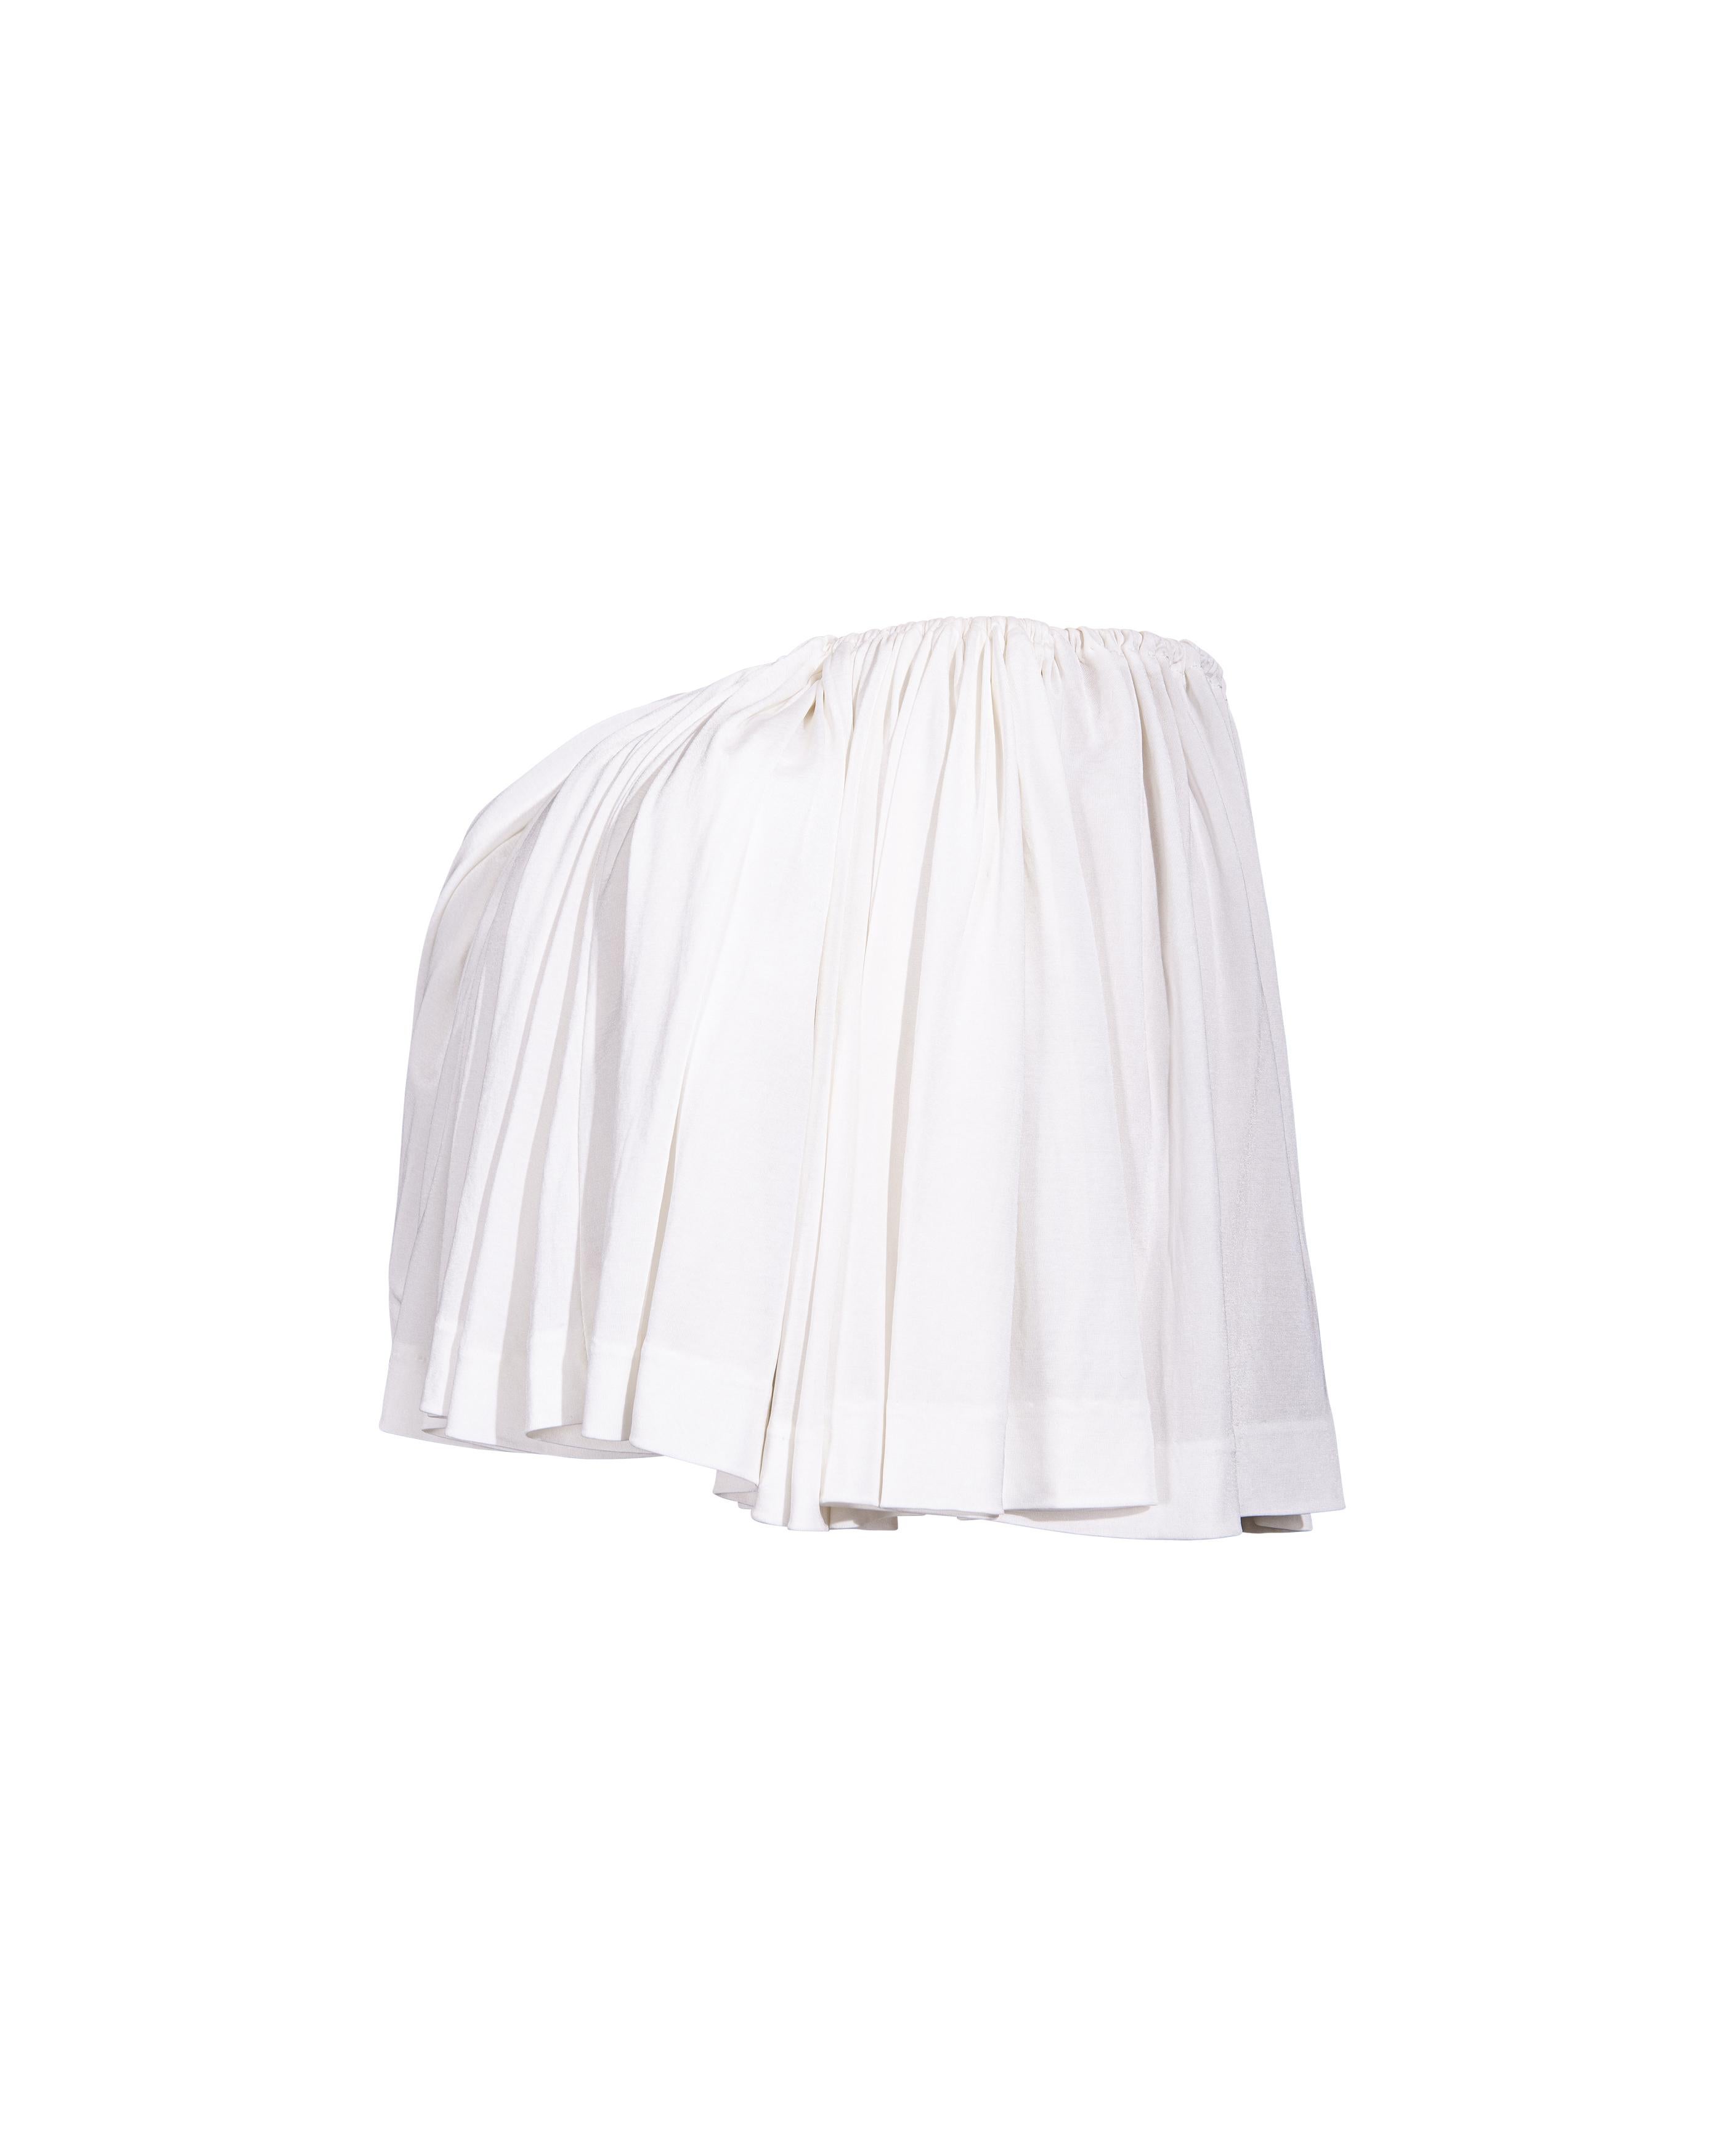 S/S 1988 Vivienne Westwood White Mini Skirt with Removable Bustle 2